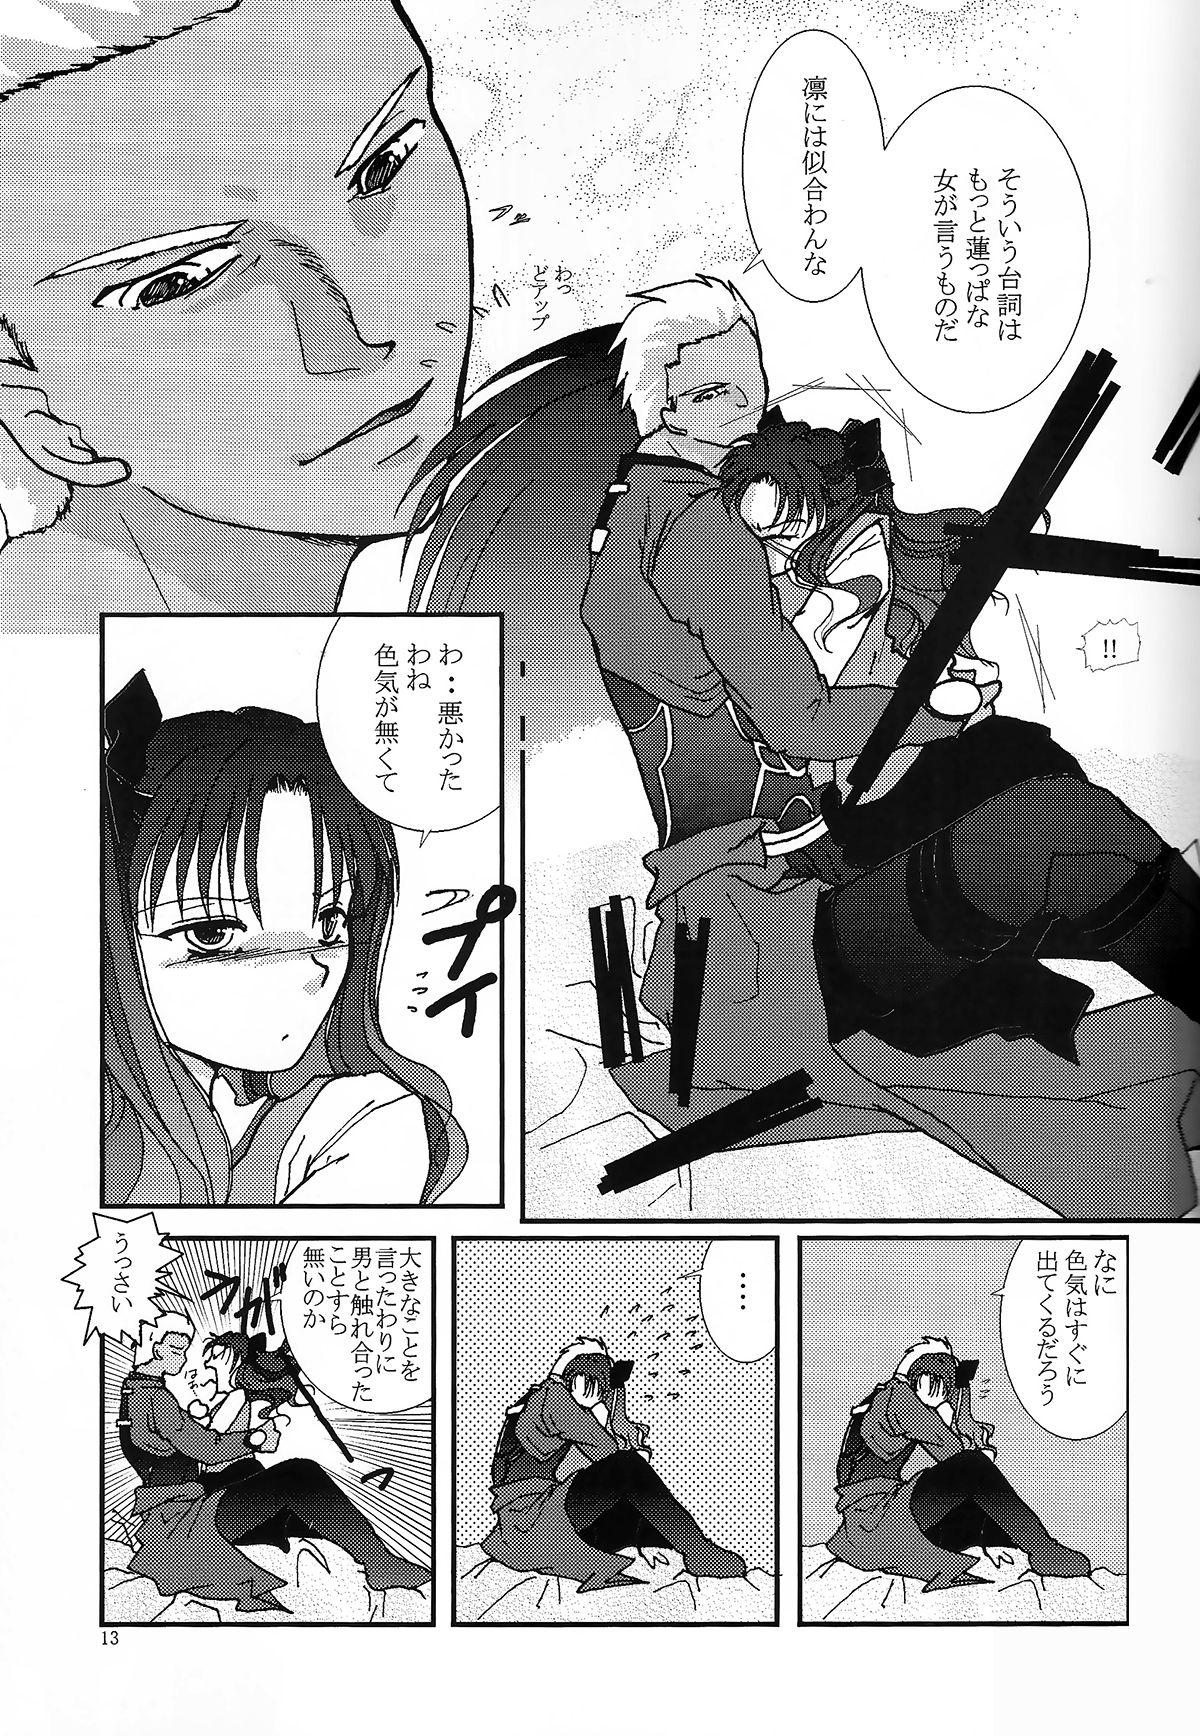 Exhibitionist Question-7 - Fate stay night Femdom Clips - Page 11